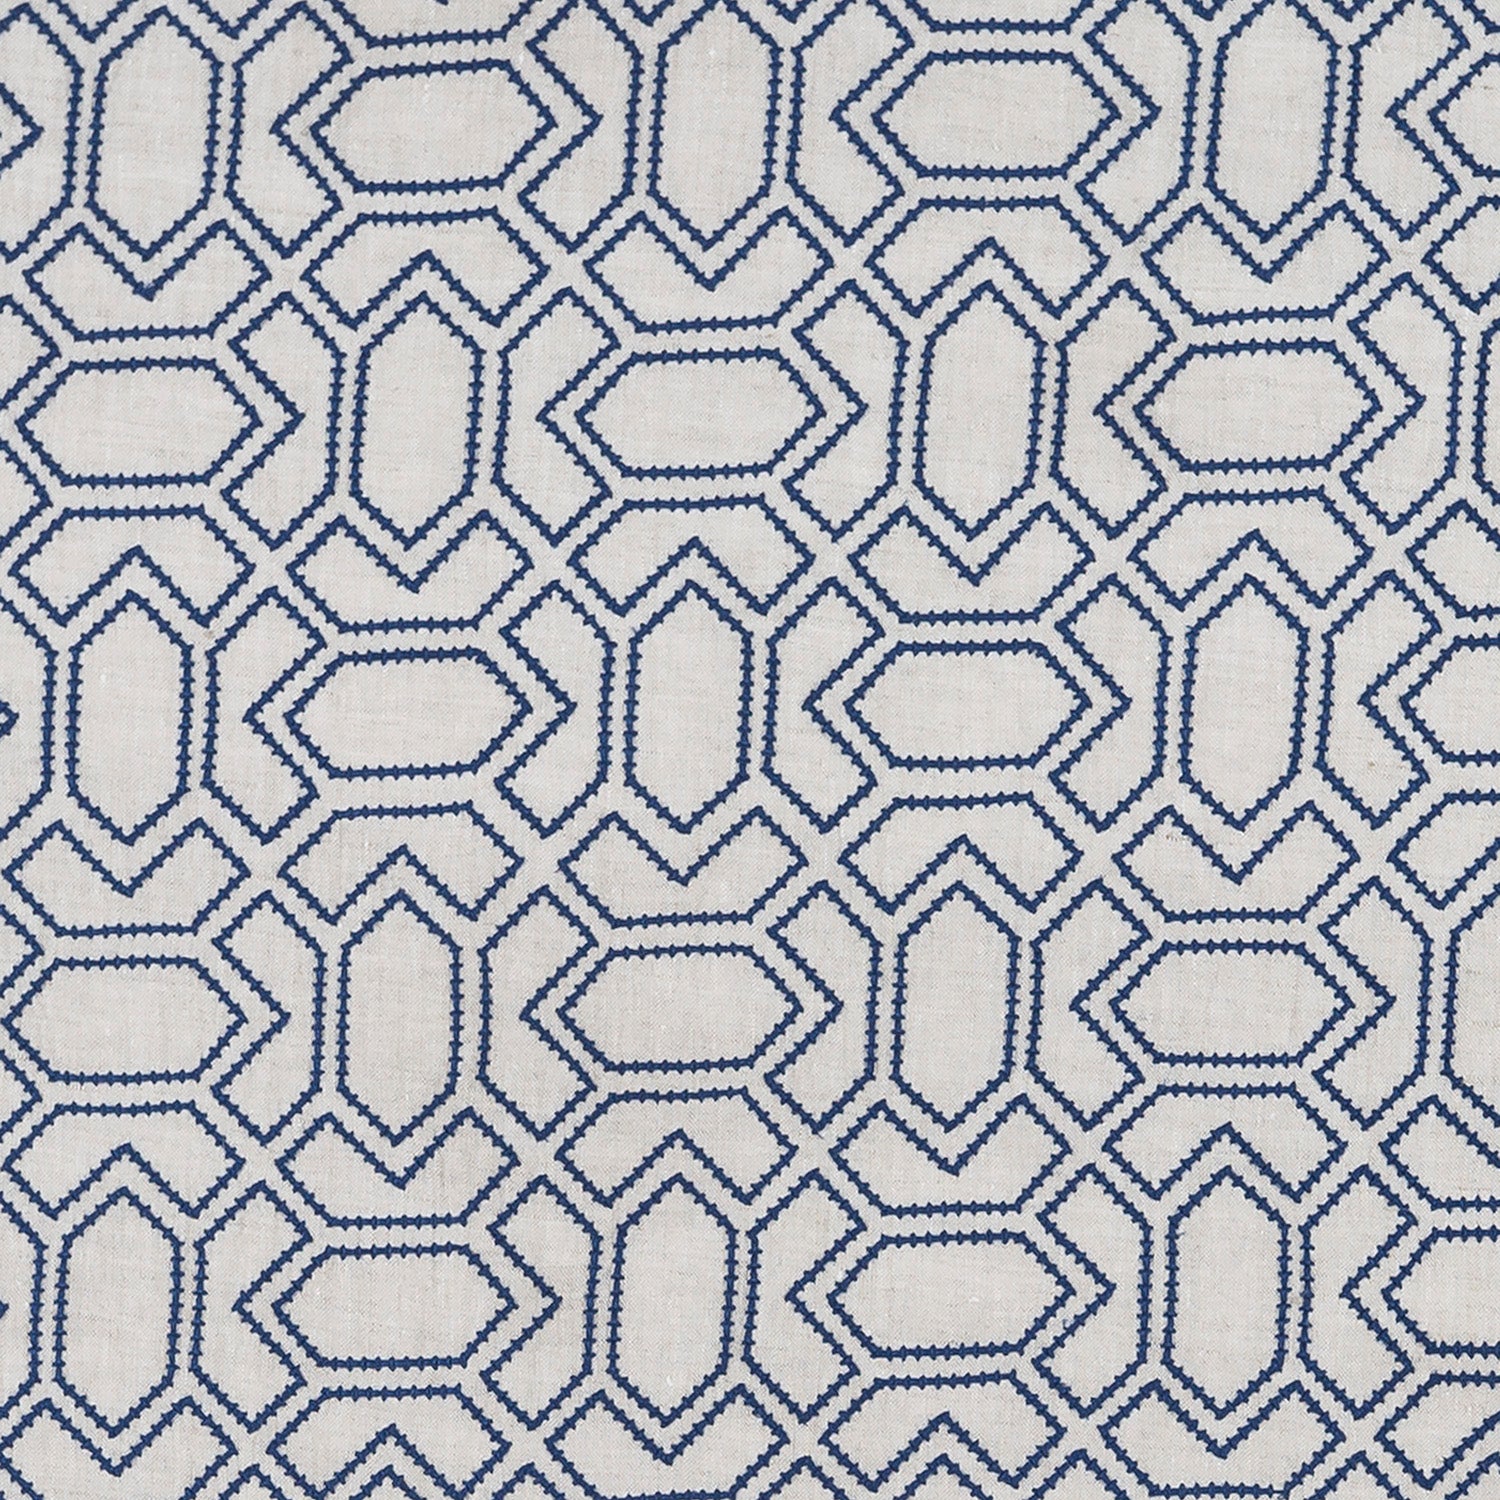 Fabric with an embroidered geometric grid print in navy on a light gray field.